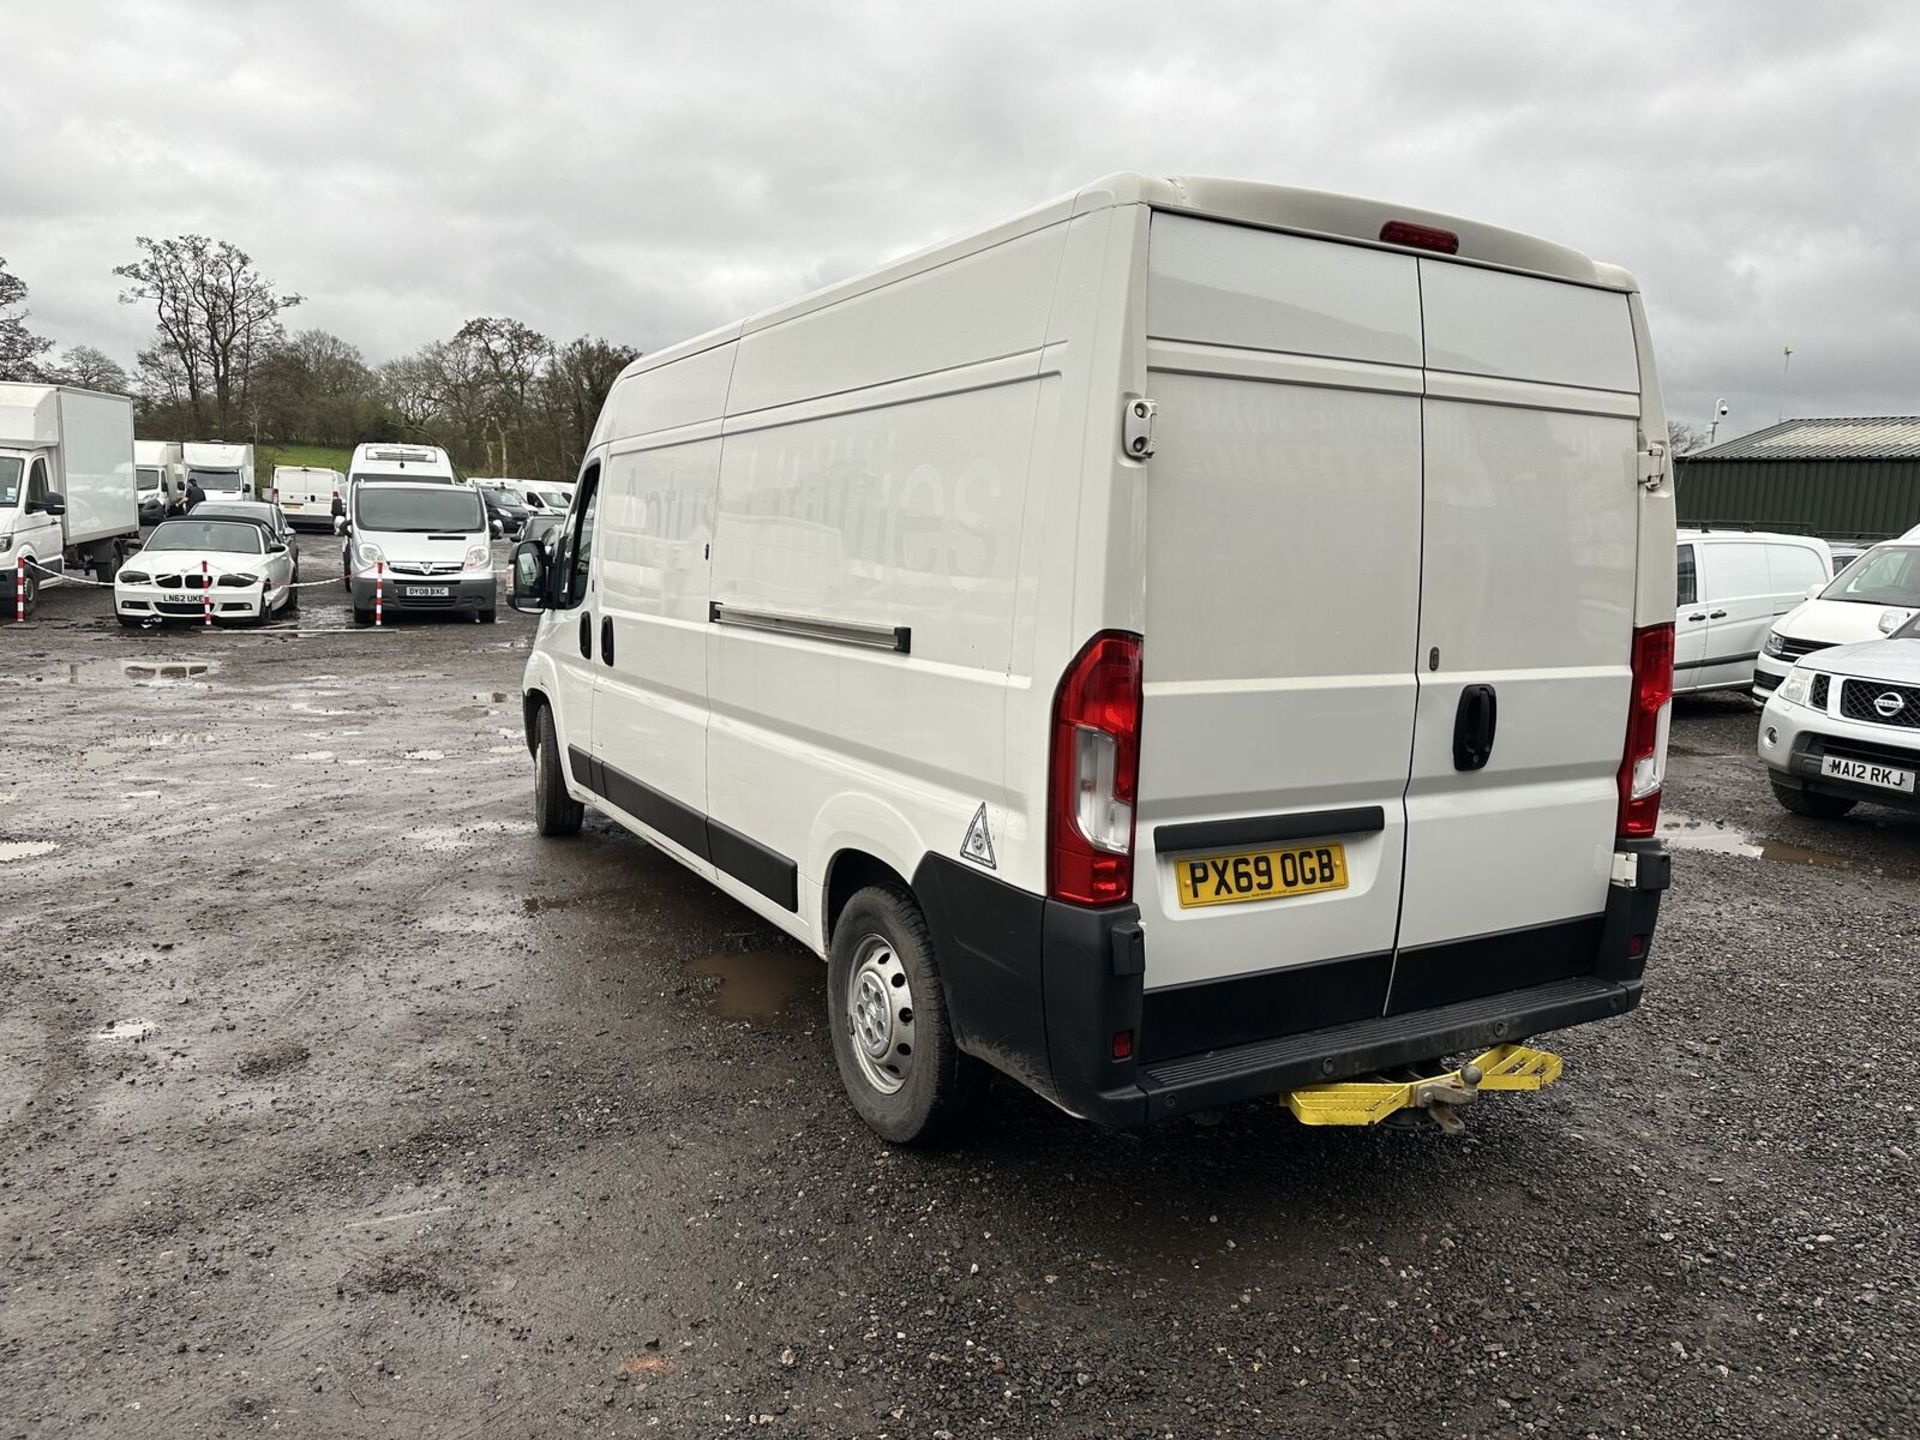 69 PLATE PEUGEOT BOXER: BLUE HDI POWER, READY FOR DUTY - Image 15 of 19